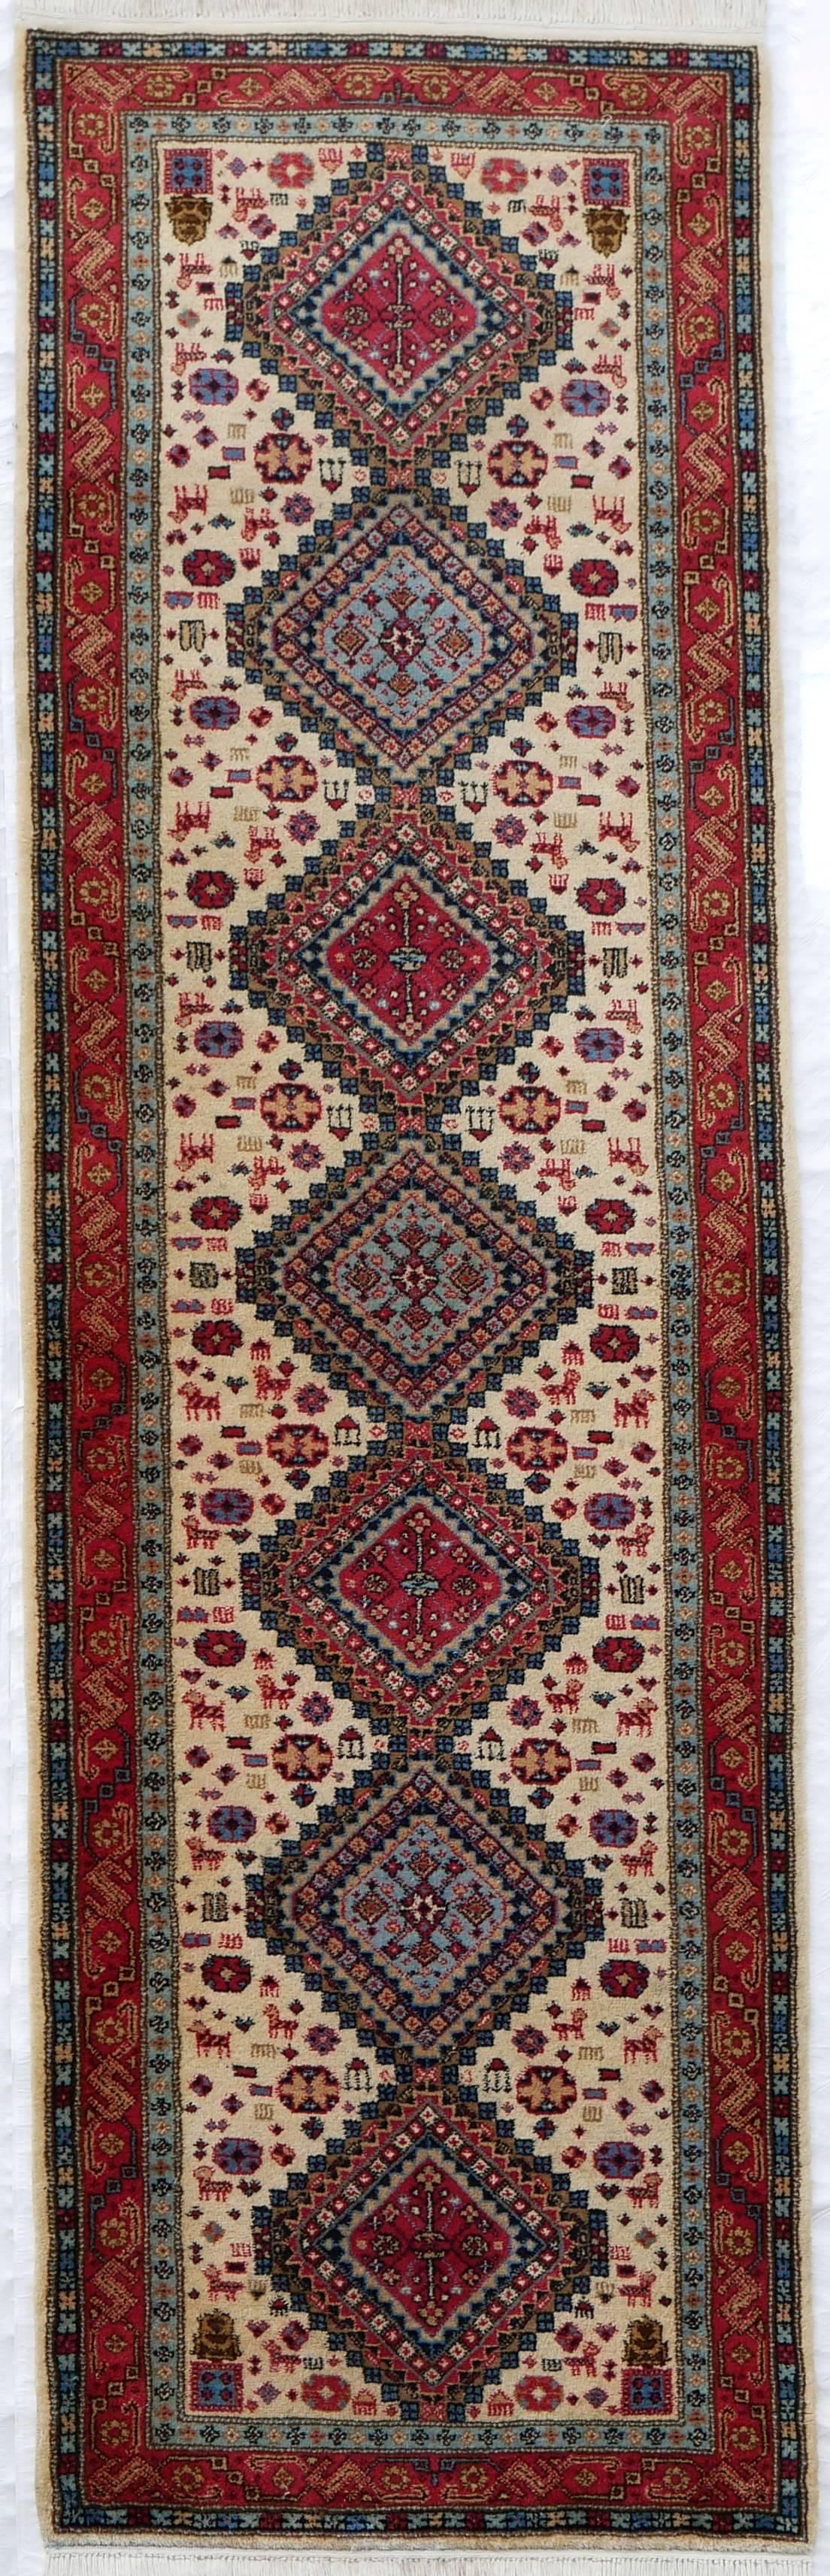 This is a rare Tabriz atelier runner featuring a number of nomadic motif in tribute to the weaving arts tribal heritage. 
The seven-medallion lozenge (Yalameh) is set against a cream field replete with animal symbols (Afshari). 

Origin: